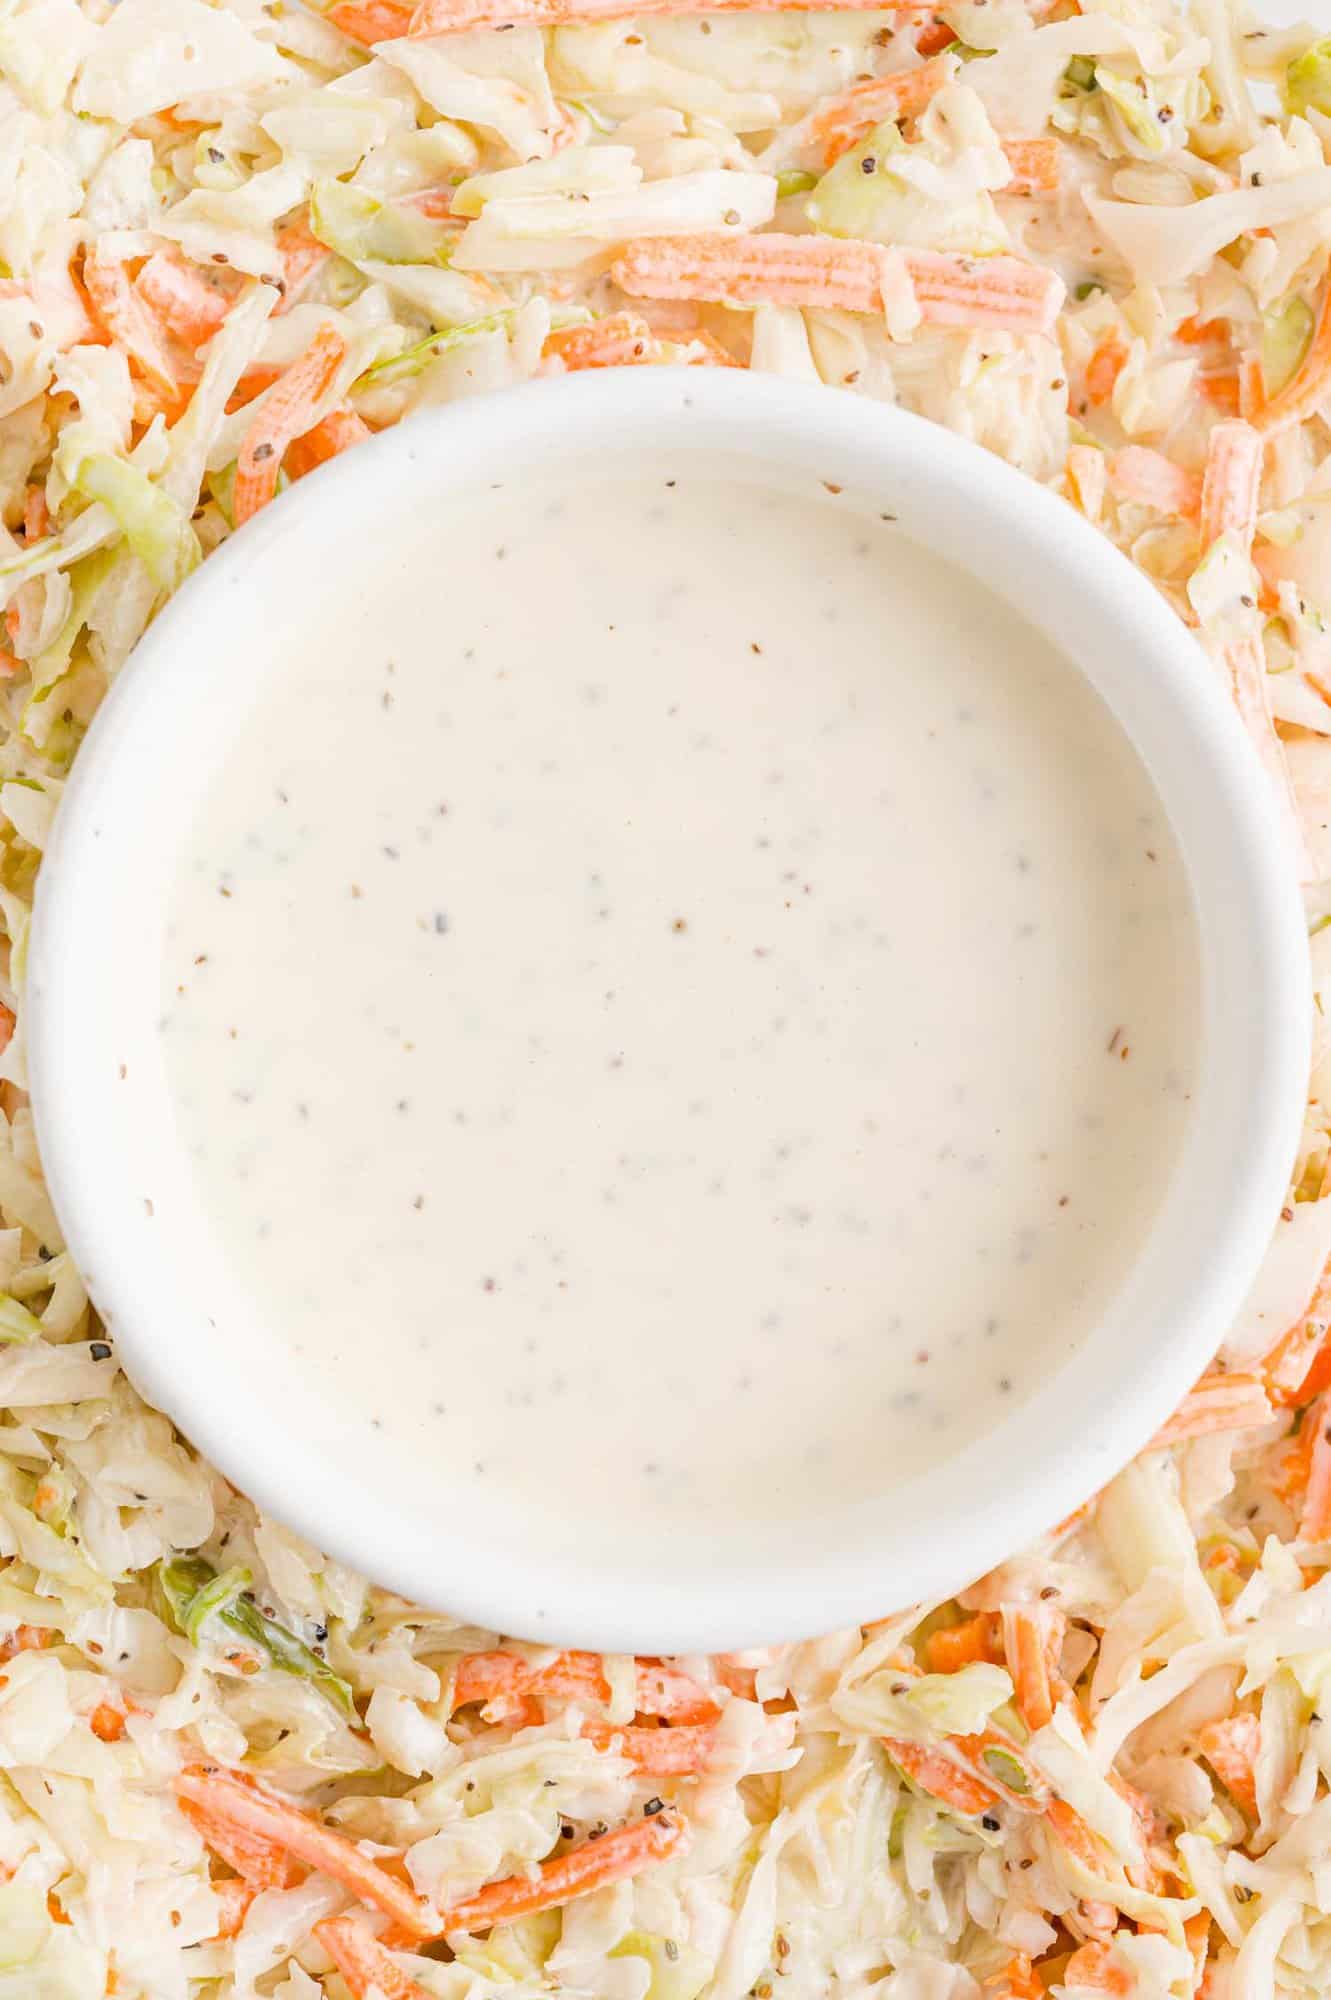 Coleslaw dressing with slaw as a backdrop.